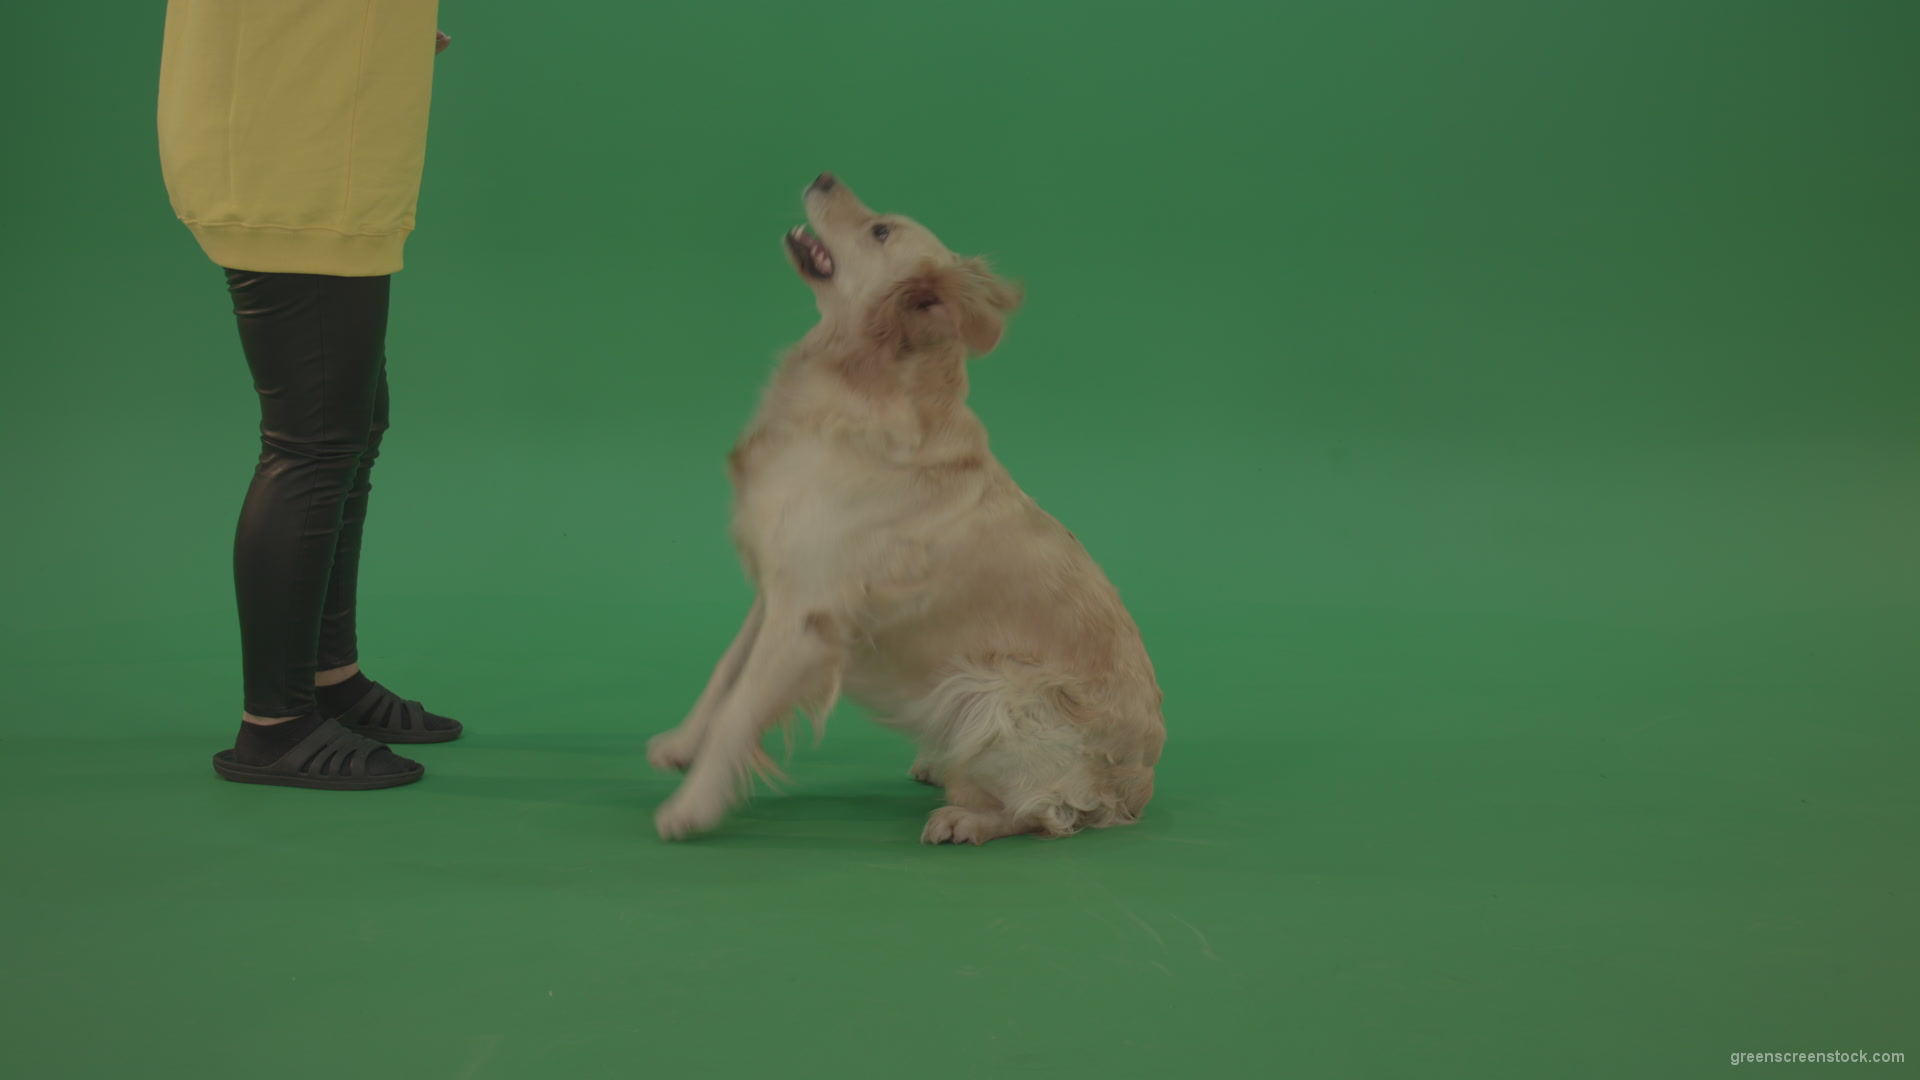 Golden-Retriever-hunter-Bird-Dog-sit-and-barking-to-owner-isolated-on-green-screen-4K-video-footage_008 Green Screen Stock